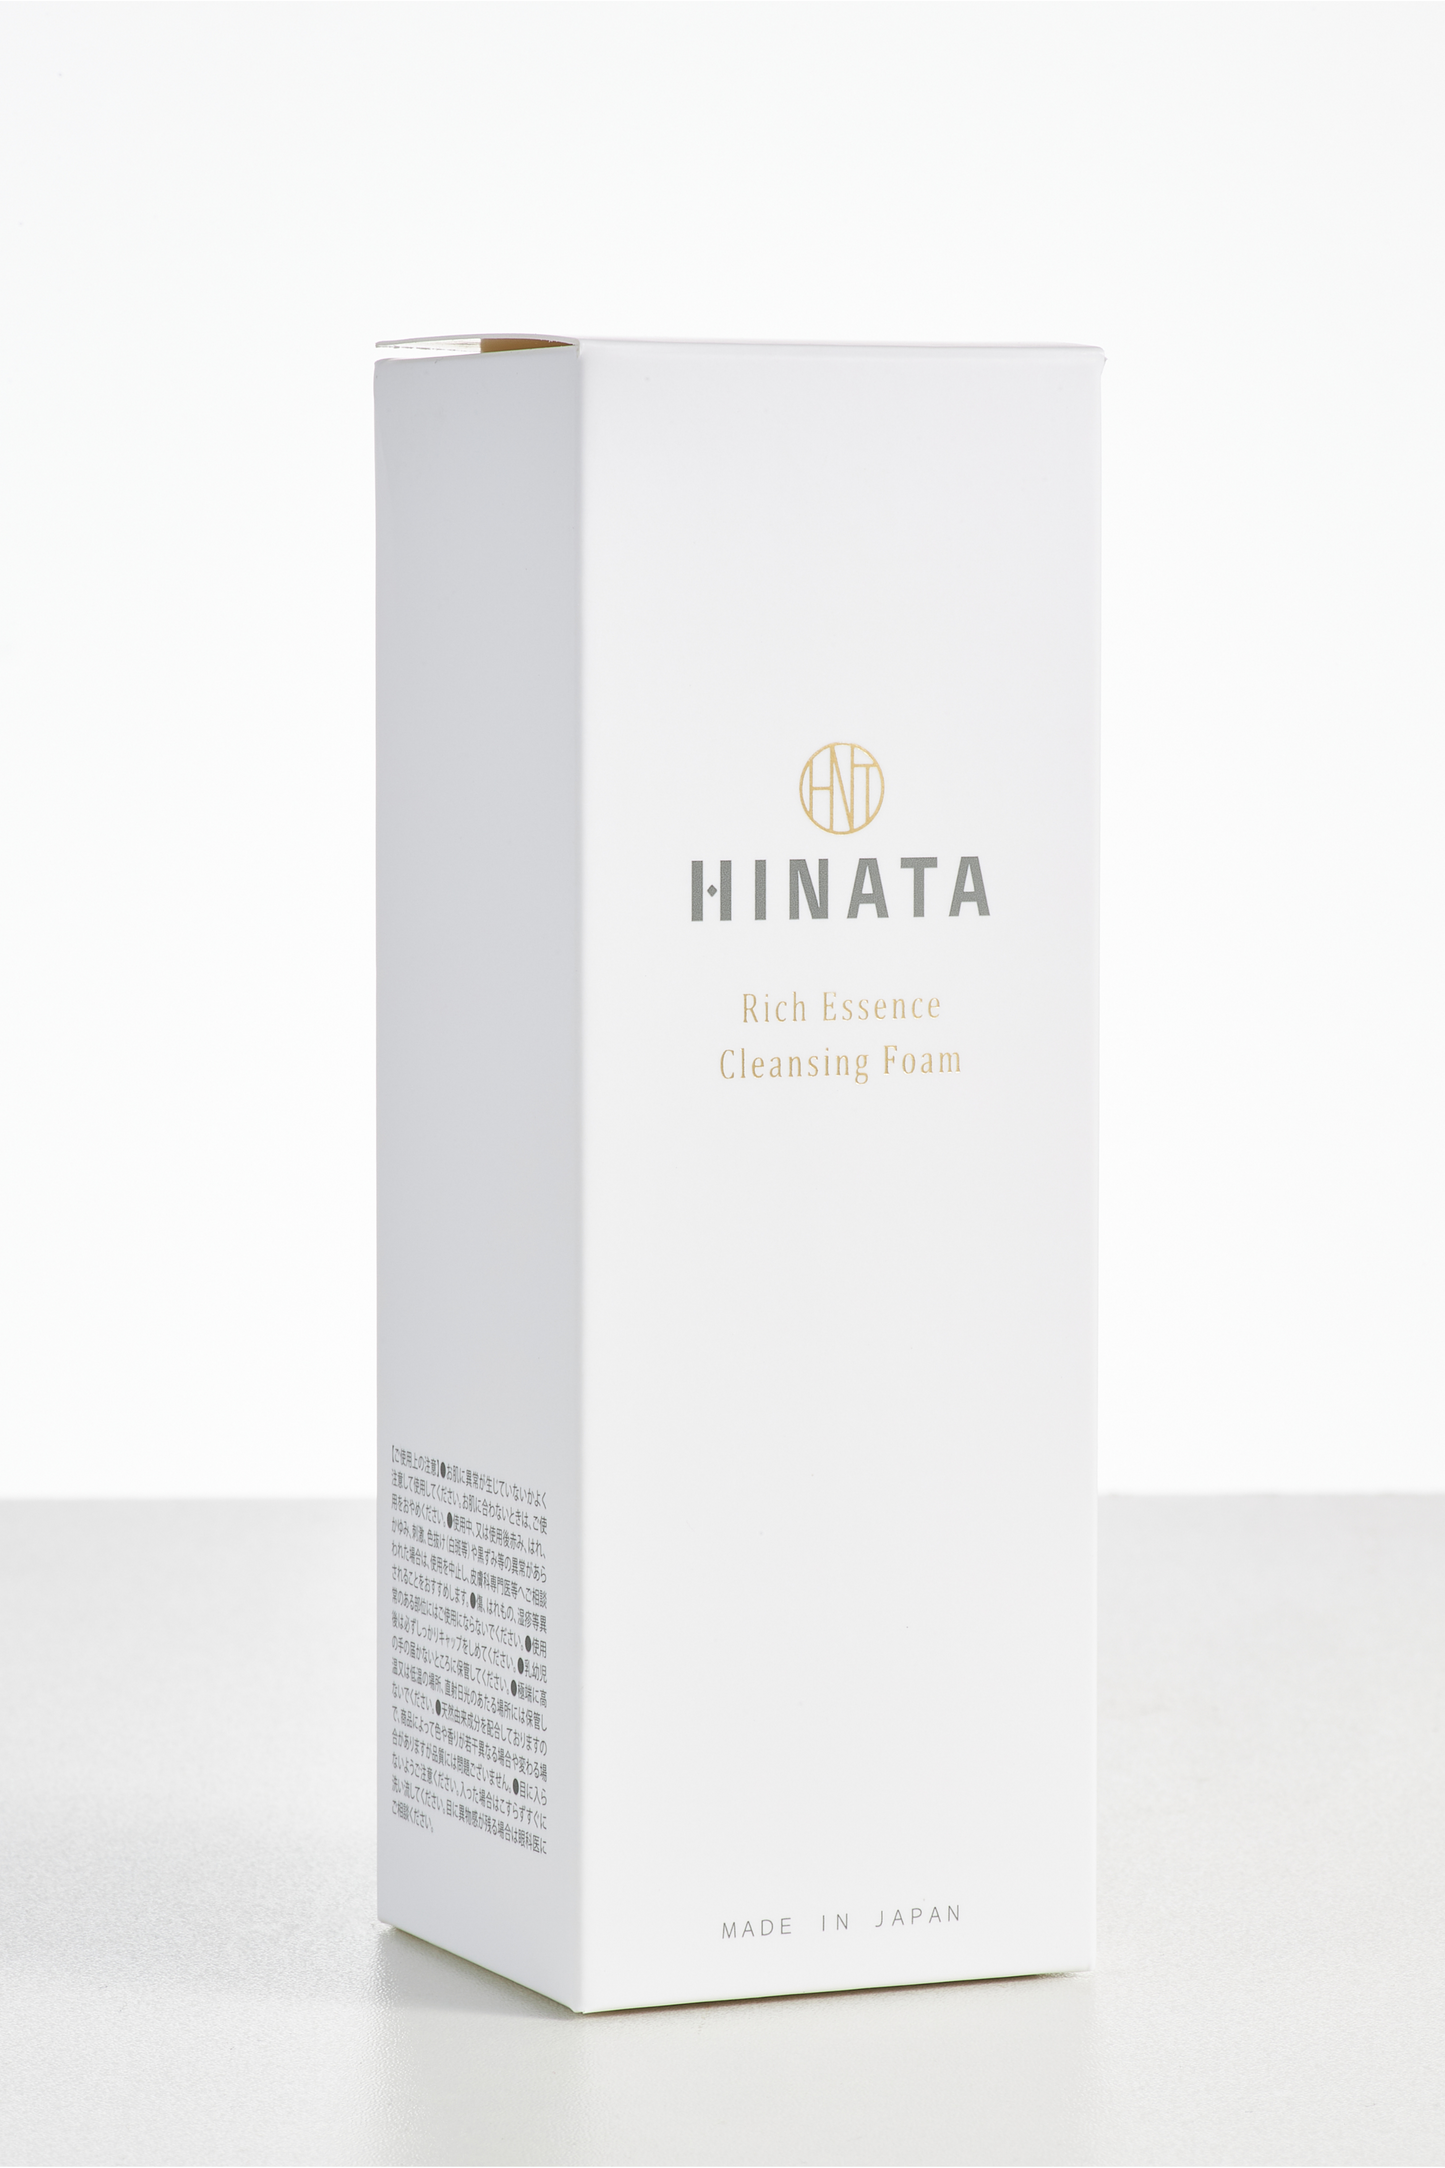 5. HINATA Rich Essence Cleansing Foam: Cleansing and moisturising, anti-pollution